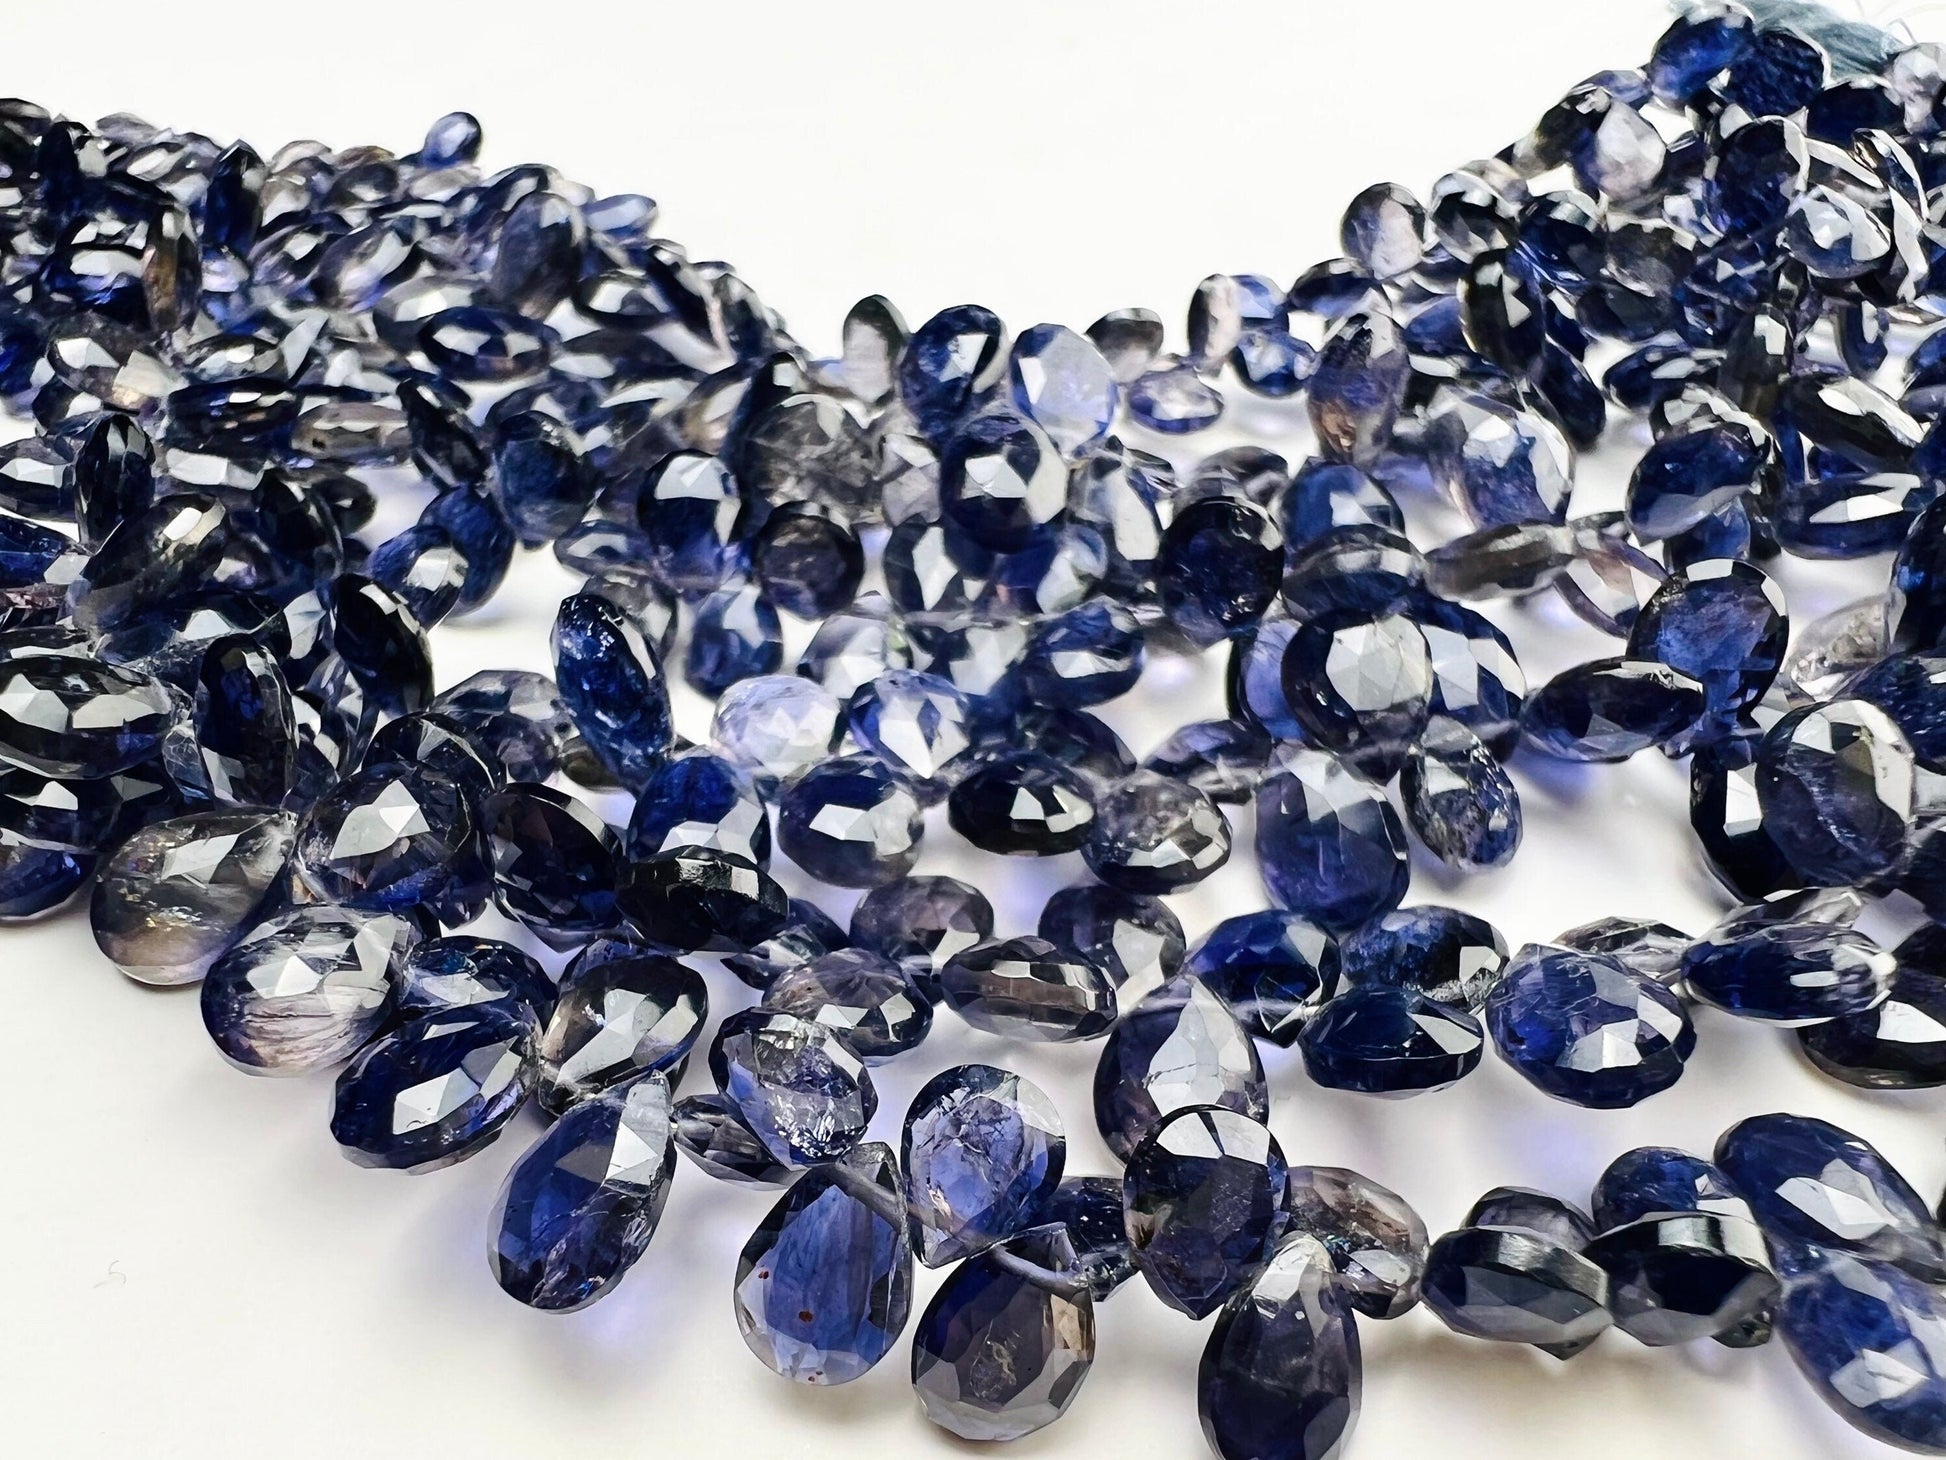 Genuine Iolite Faceted pear Drop Briolette 5.5-6x8-9.5mm Beautiful Rare Gemstone for Jewelry Making Beads,10,20,30pcs or 8” full st 70 pcs.